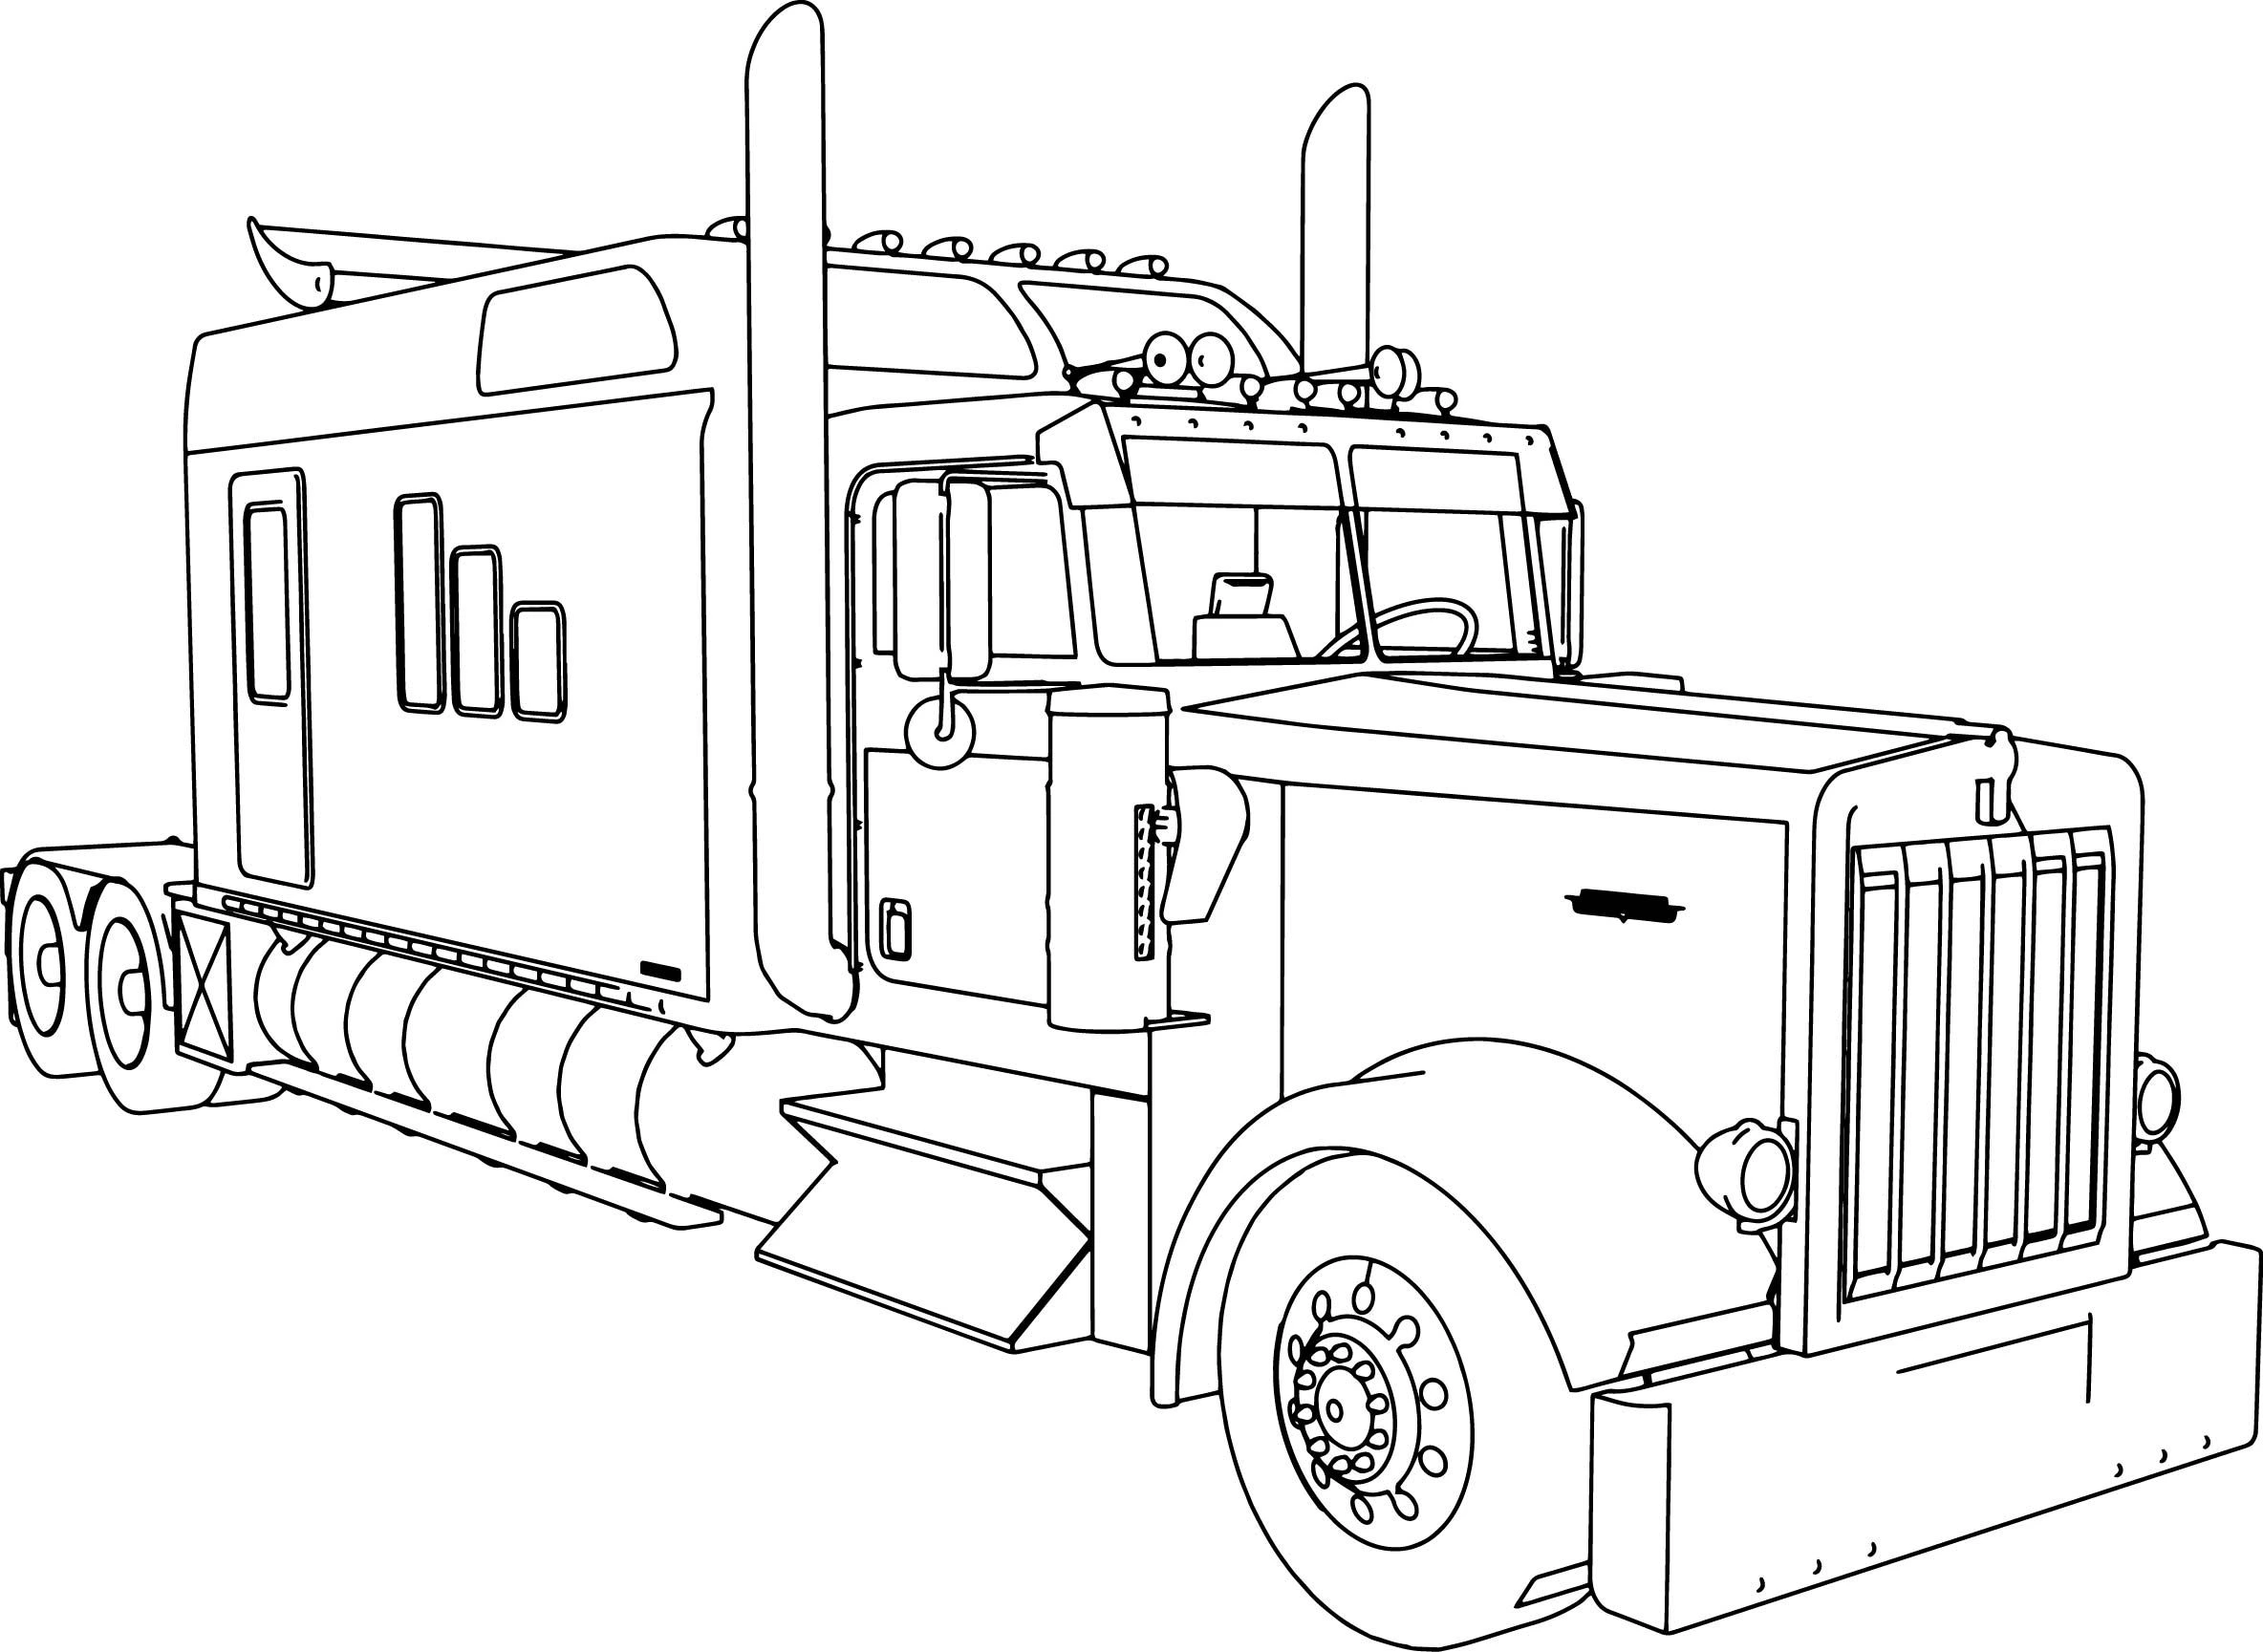 Semi Truck coloring page for kids